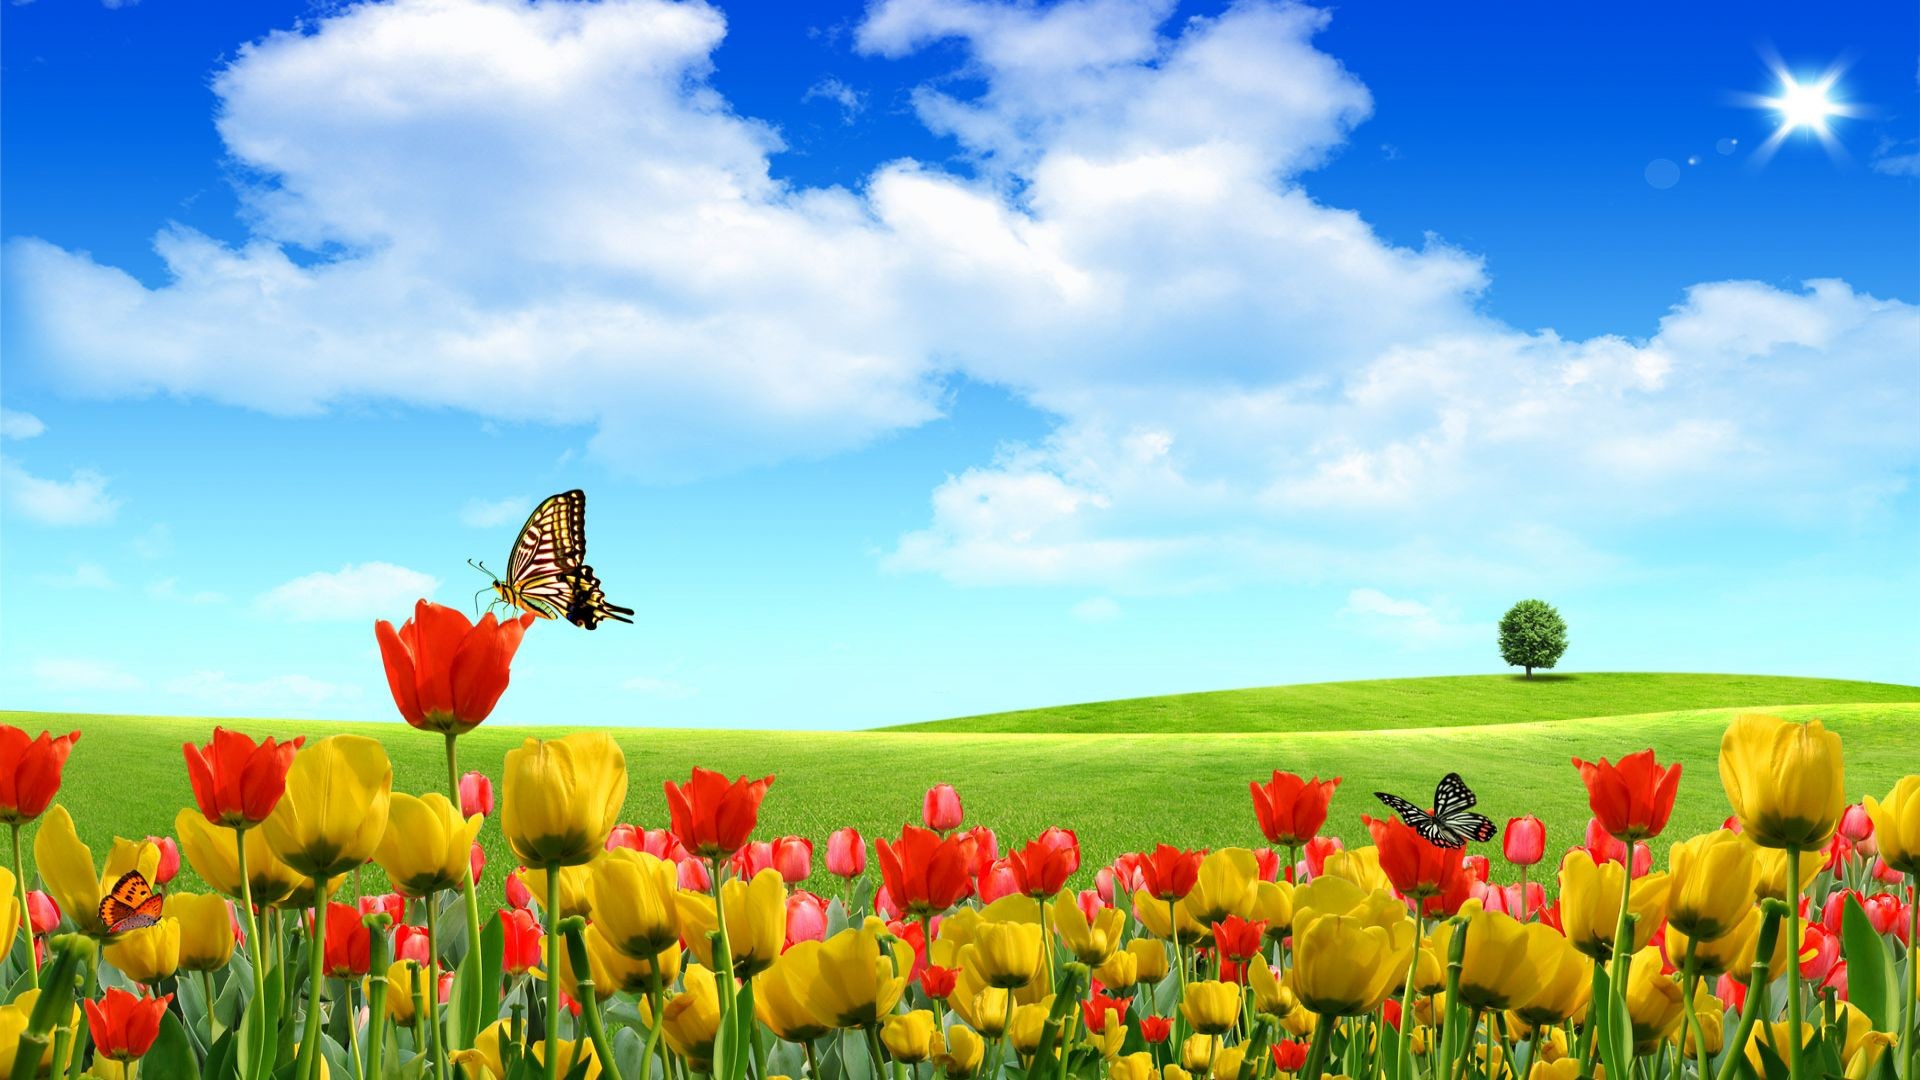 1920x1080 Free Scenery Wallpaper – Includes Beautiful Buds, Boasting of Its Natural  Scene!